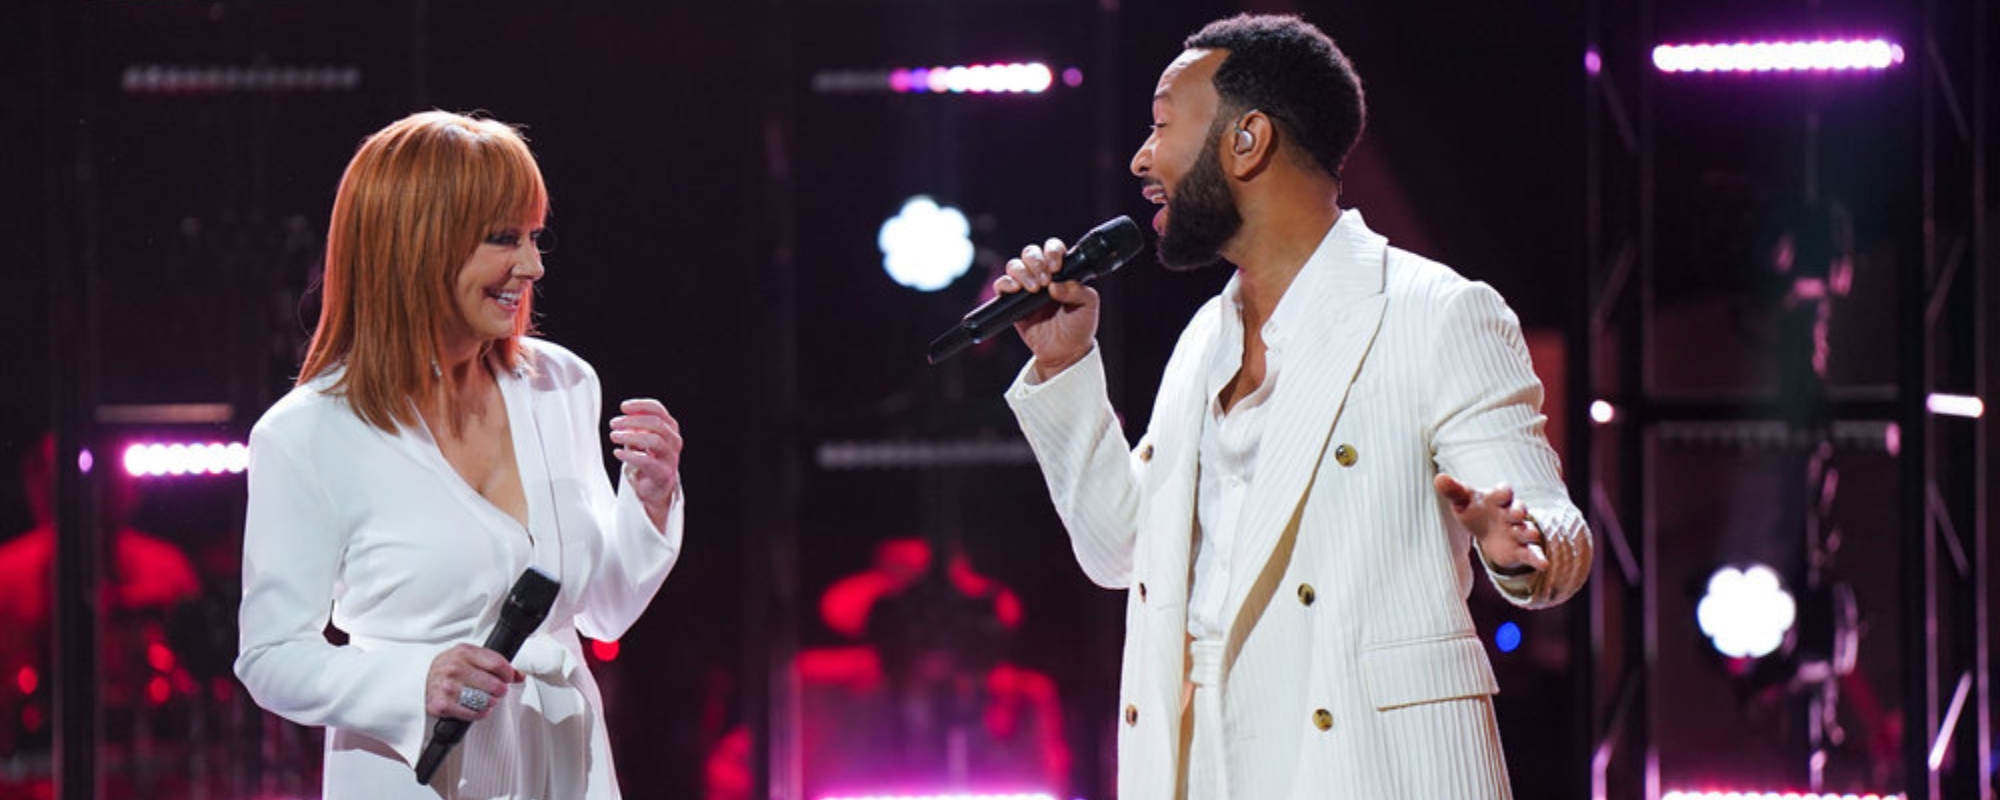 ‘The Voice’: Tae Lewis Covers Keith Urban, Makes Tough Decision Between John Legend & Reba McEntire